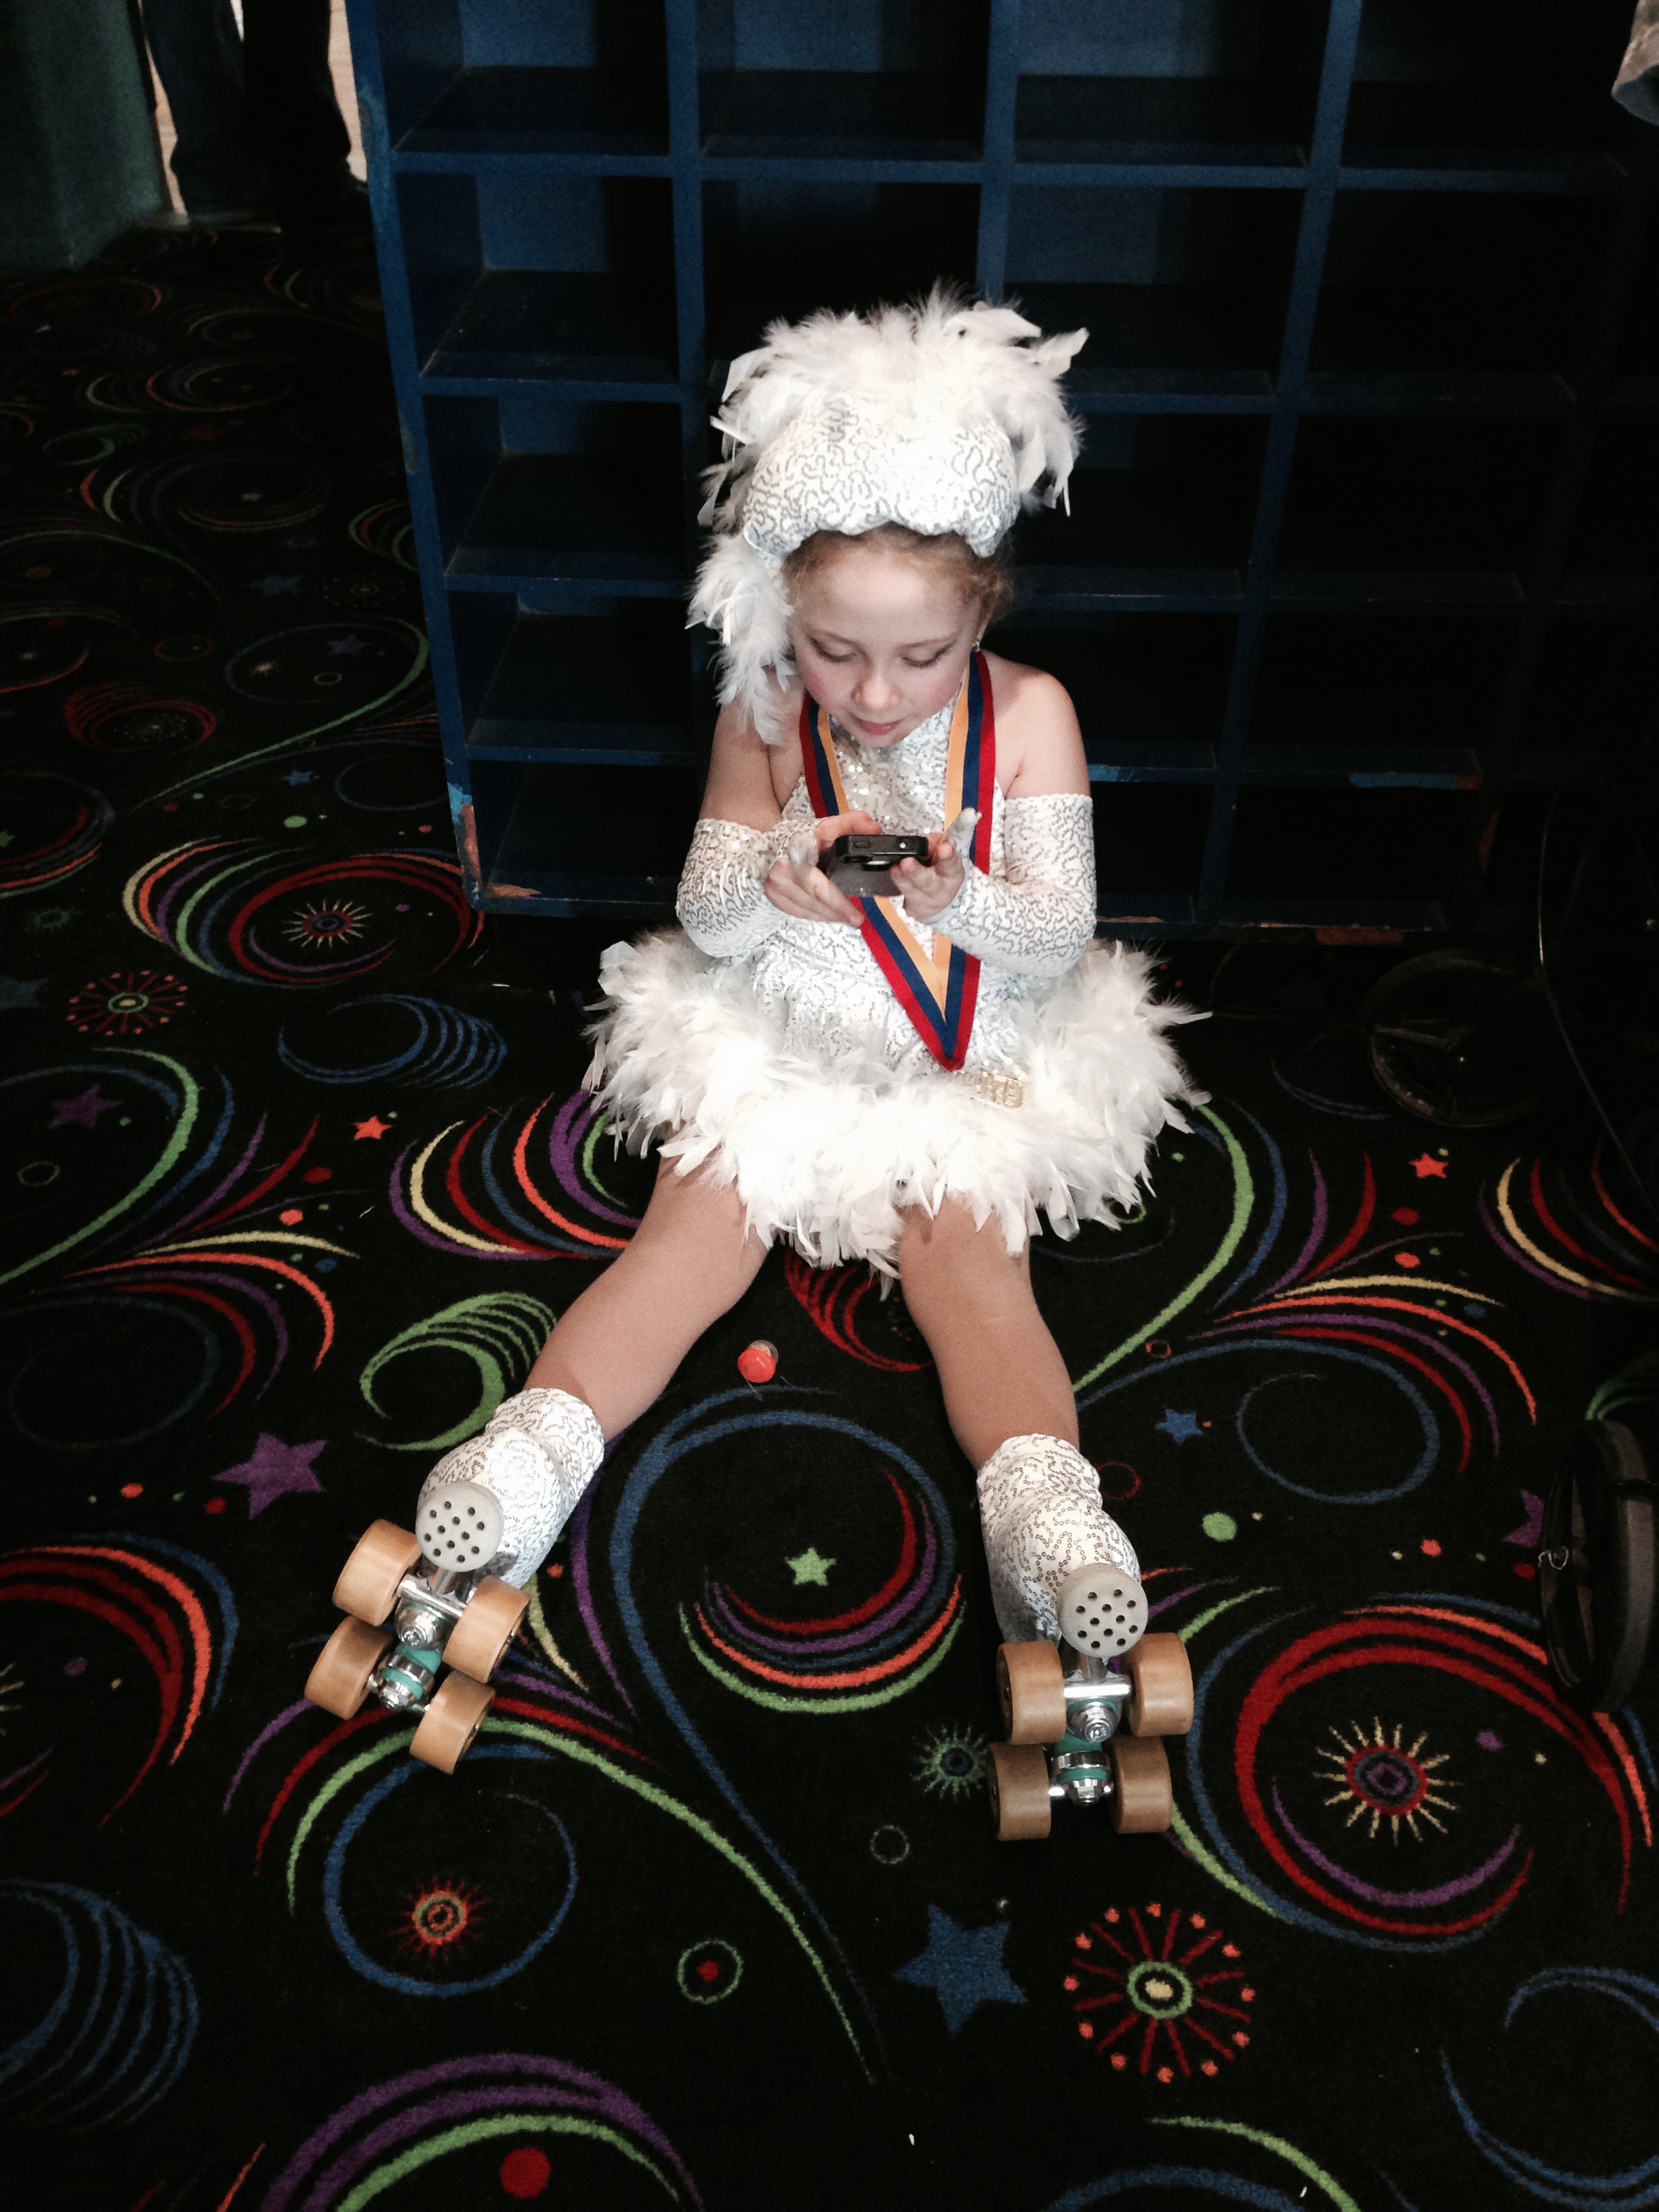 2014 California State Games Roller Skating Competition. Costume custom designed and made by Oxana Foss